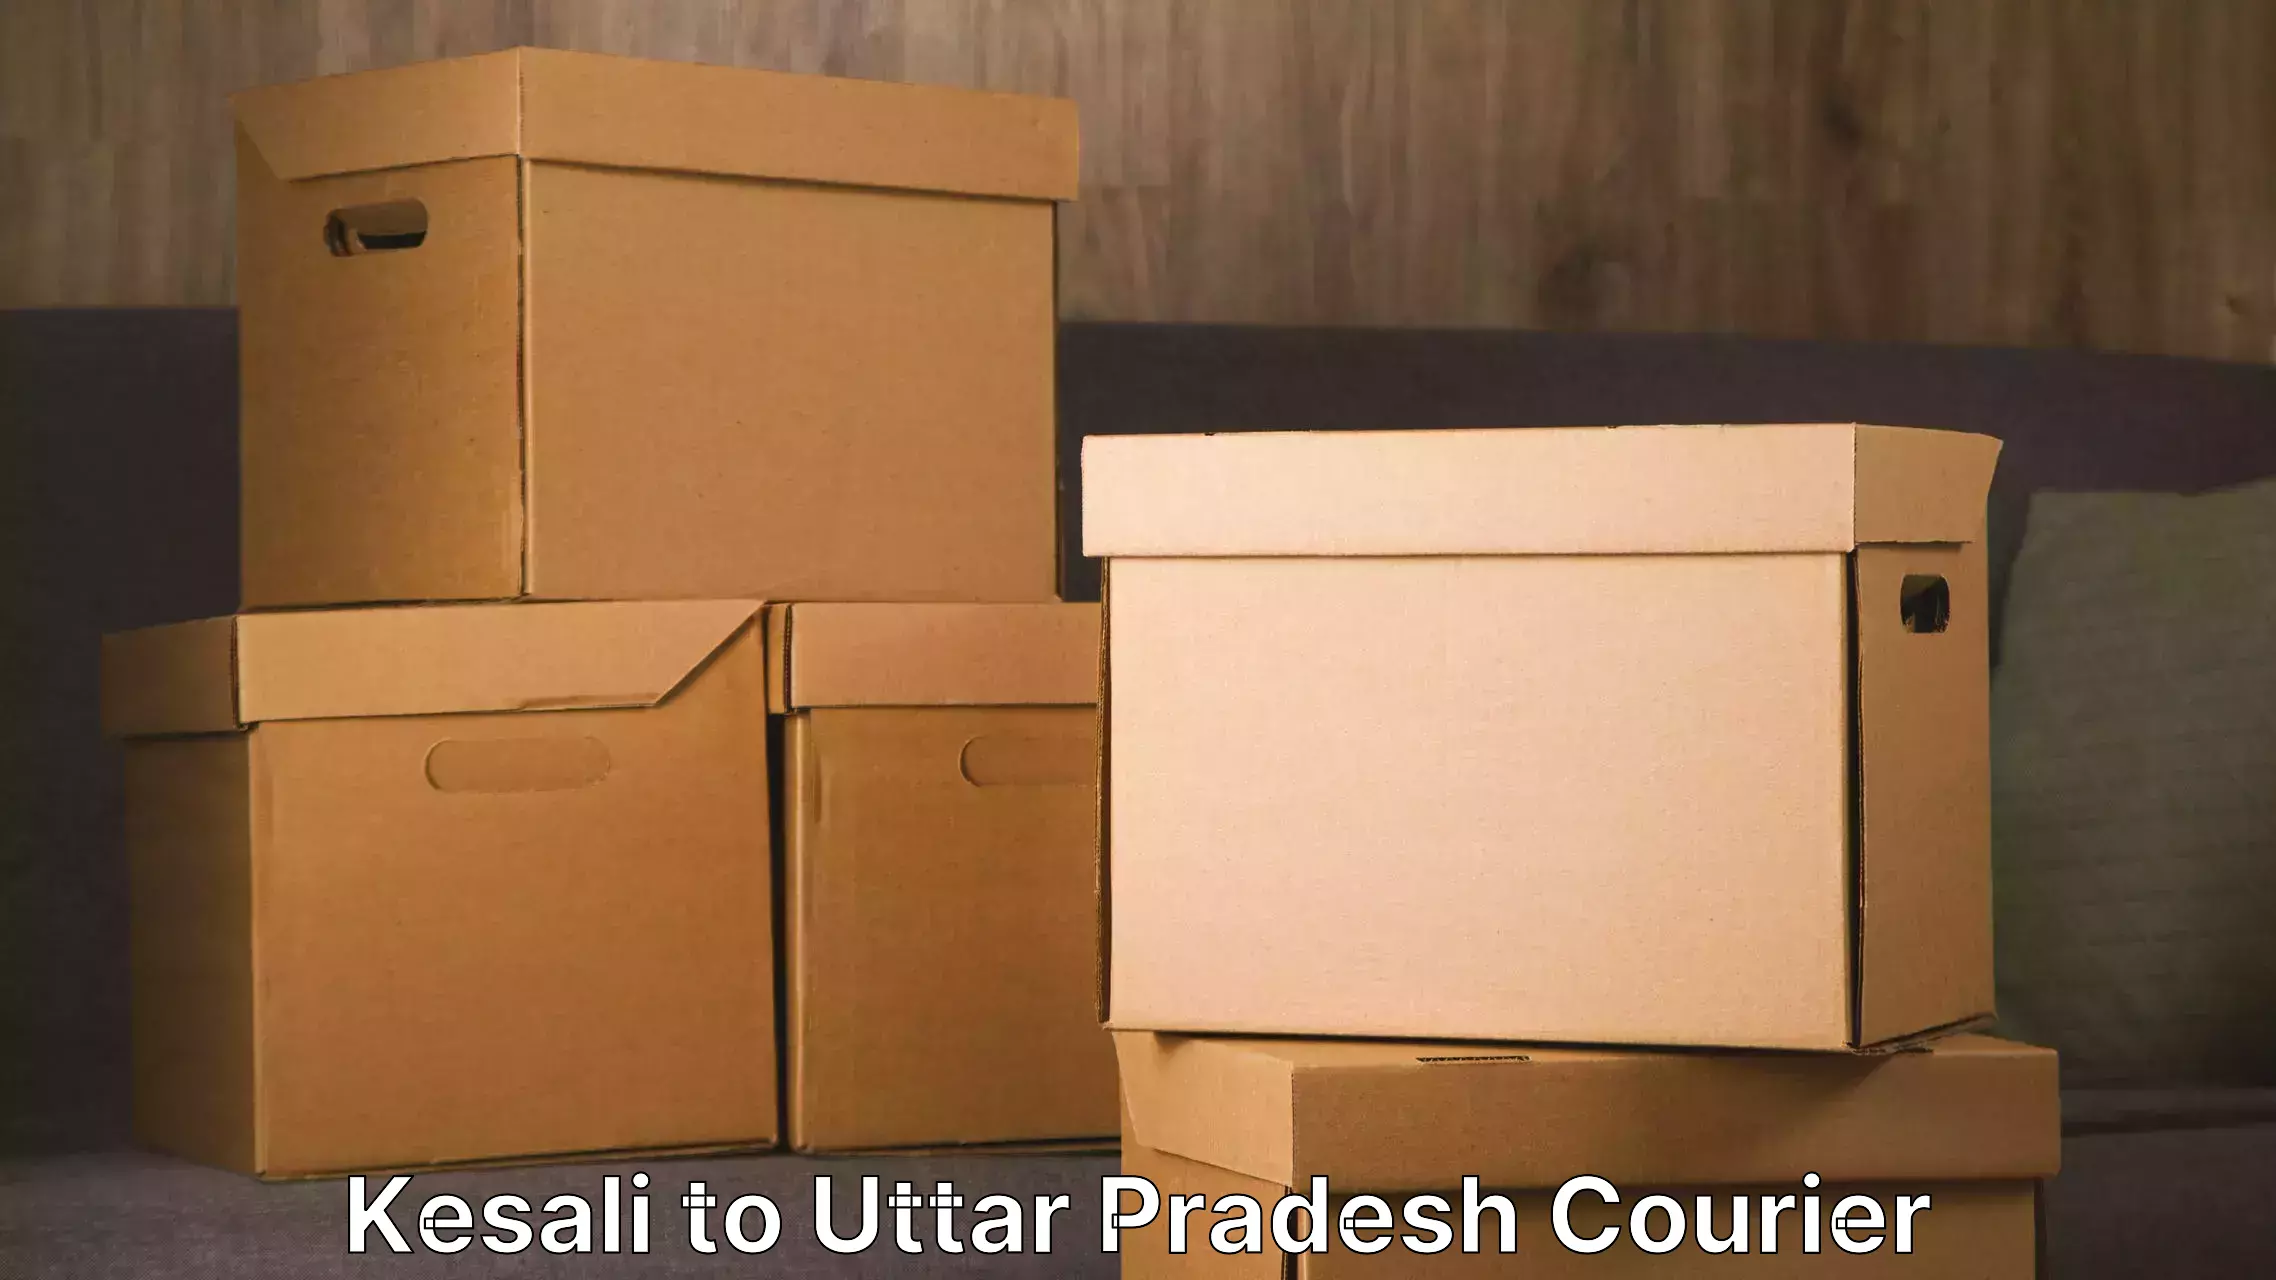 Moving and storage services Kesali to Aligarh